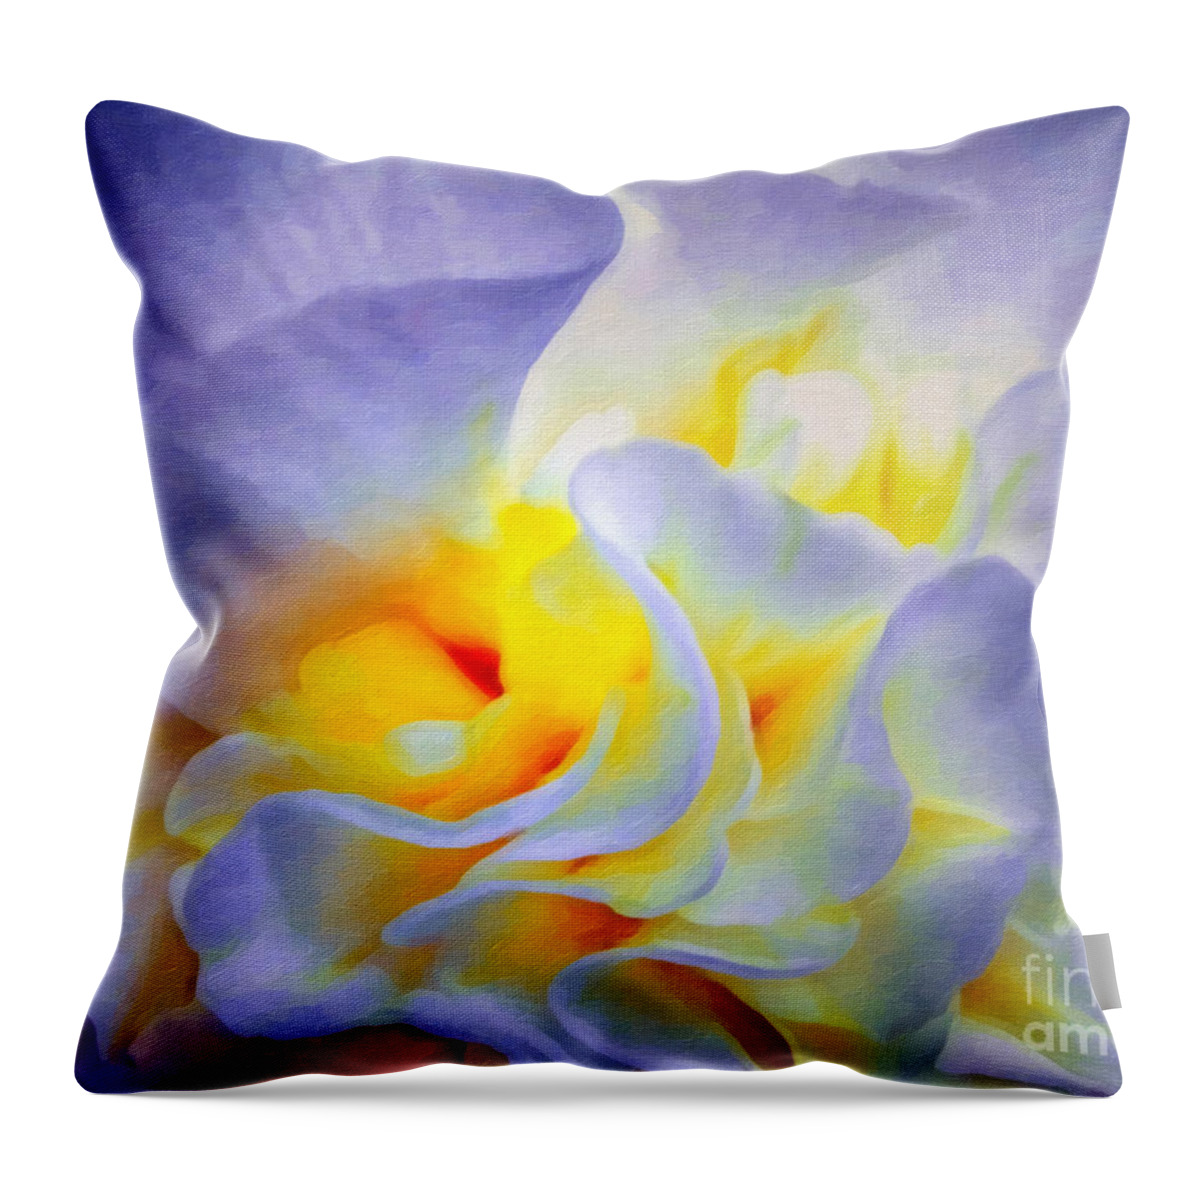 Begonia Throw Pillow featuring the digital art Begonia Shadows II Painting by Lianne Schneider